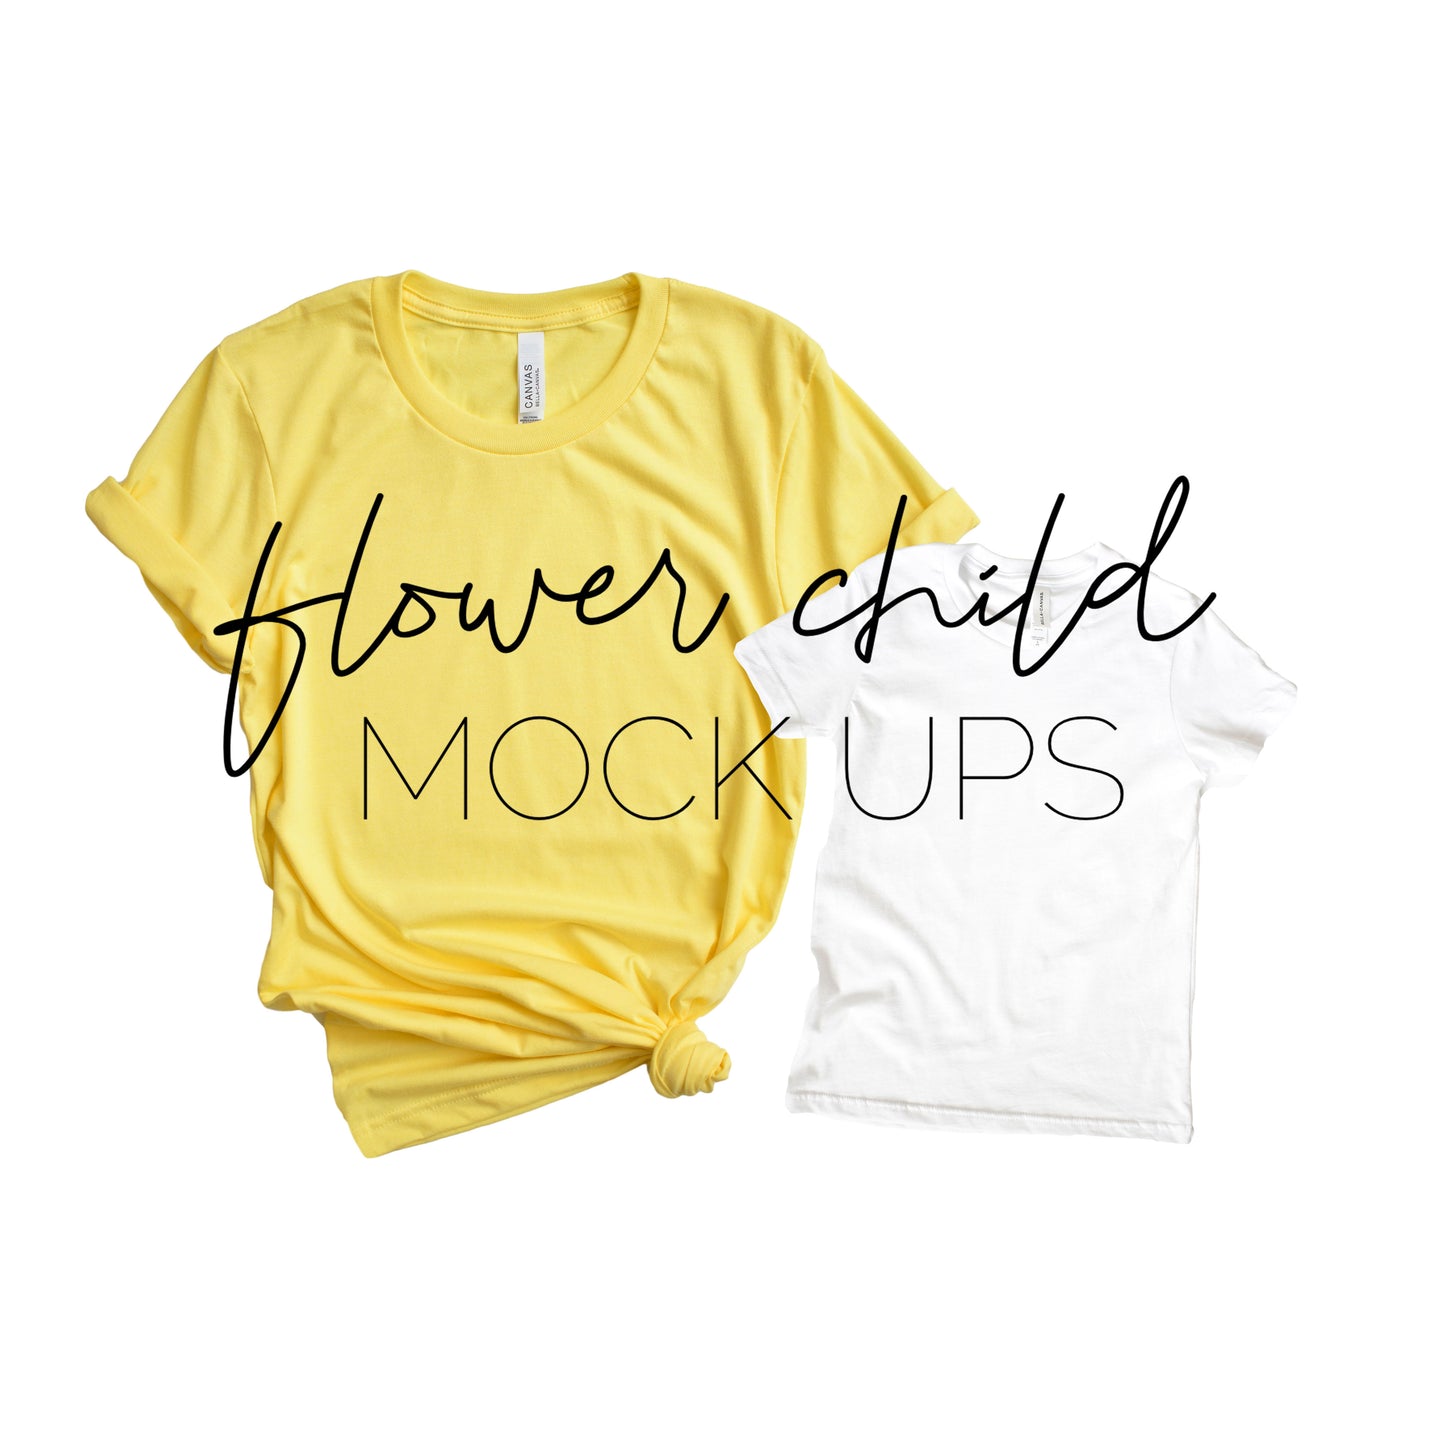 Mommy and Me Bella Canvas 3001 Heather Yellow 3001T White - flowerchildmockups